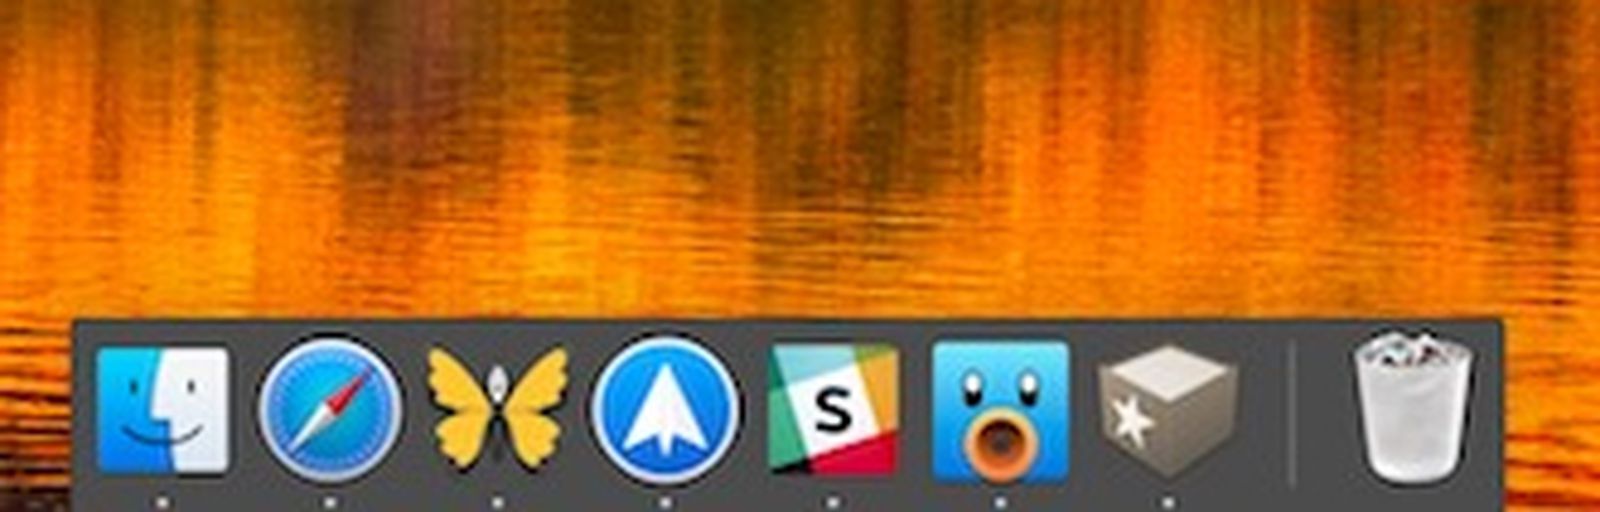 mac show a window on doc for every open app